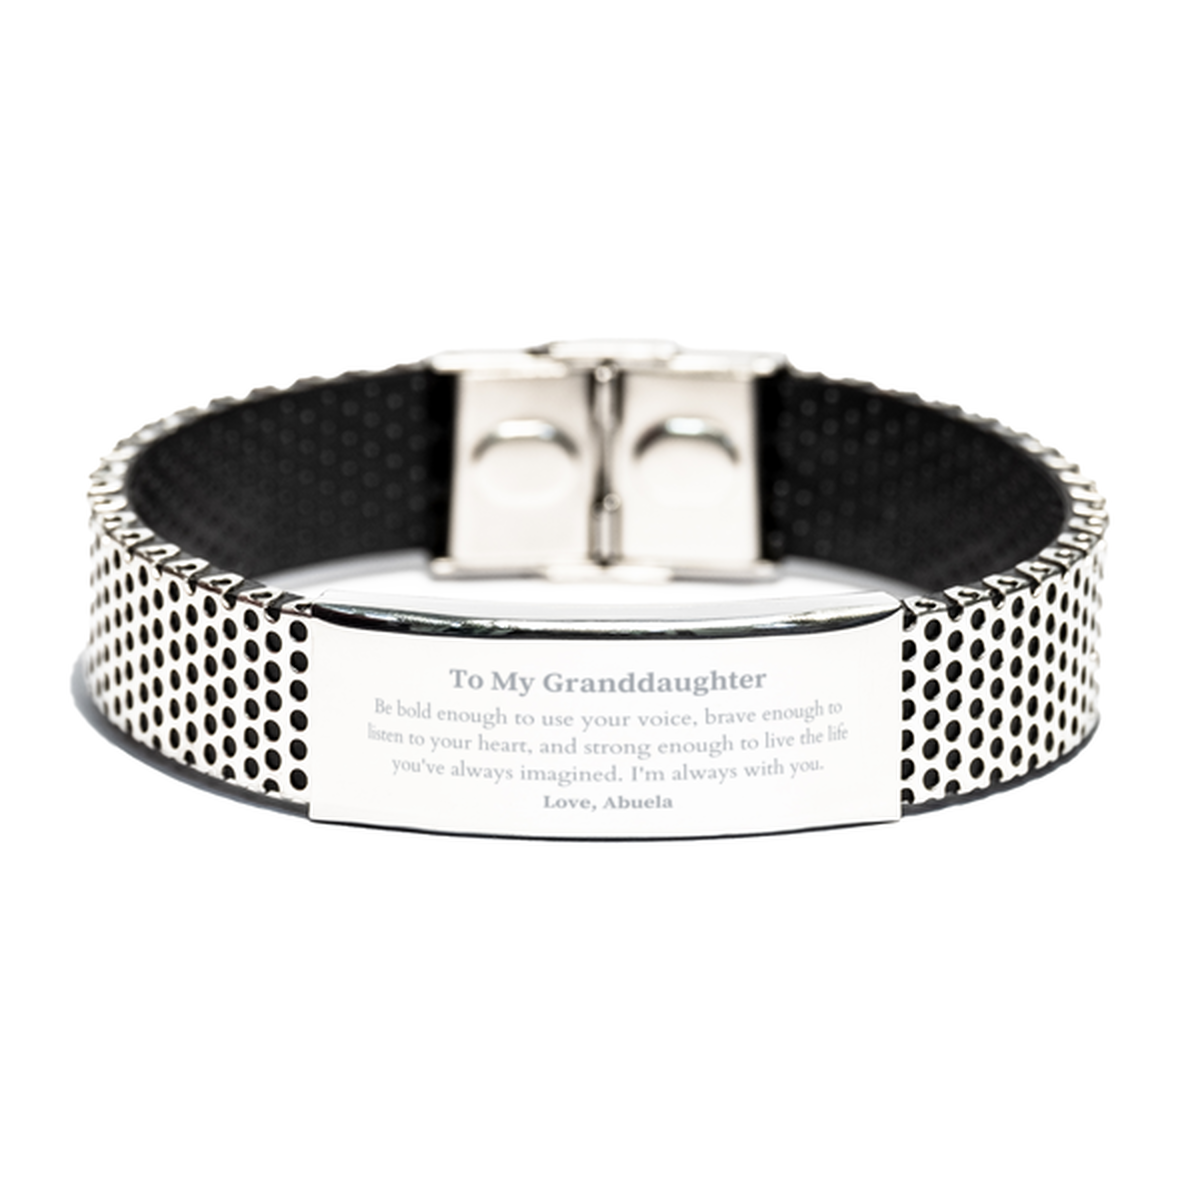 Keepsake Granddaughter Stainless Steel Bracelet Gift Idea Graduation Christmas Birthday Granddaughter from Abuela, Granddaughter Be bold enough to use your voice, brave enough to listen to your heart. Love, Abuela